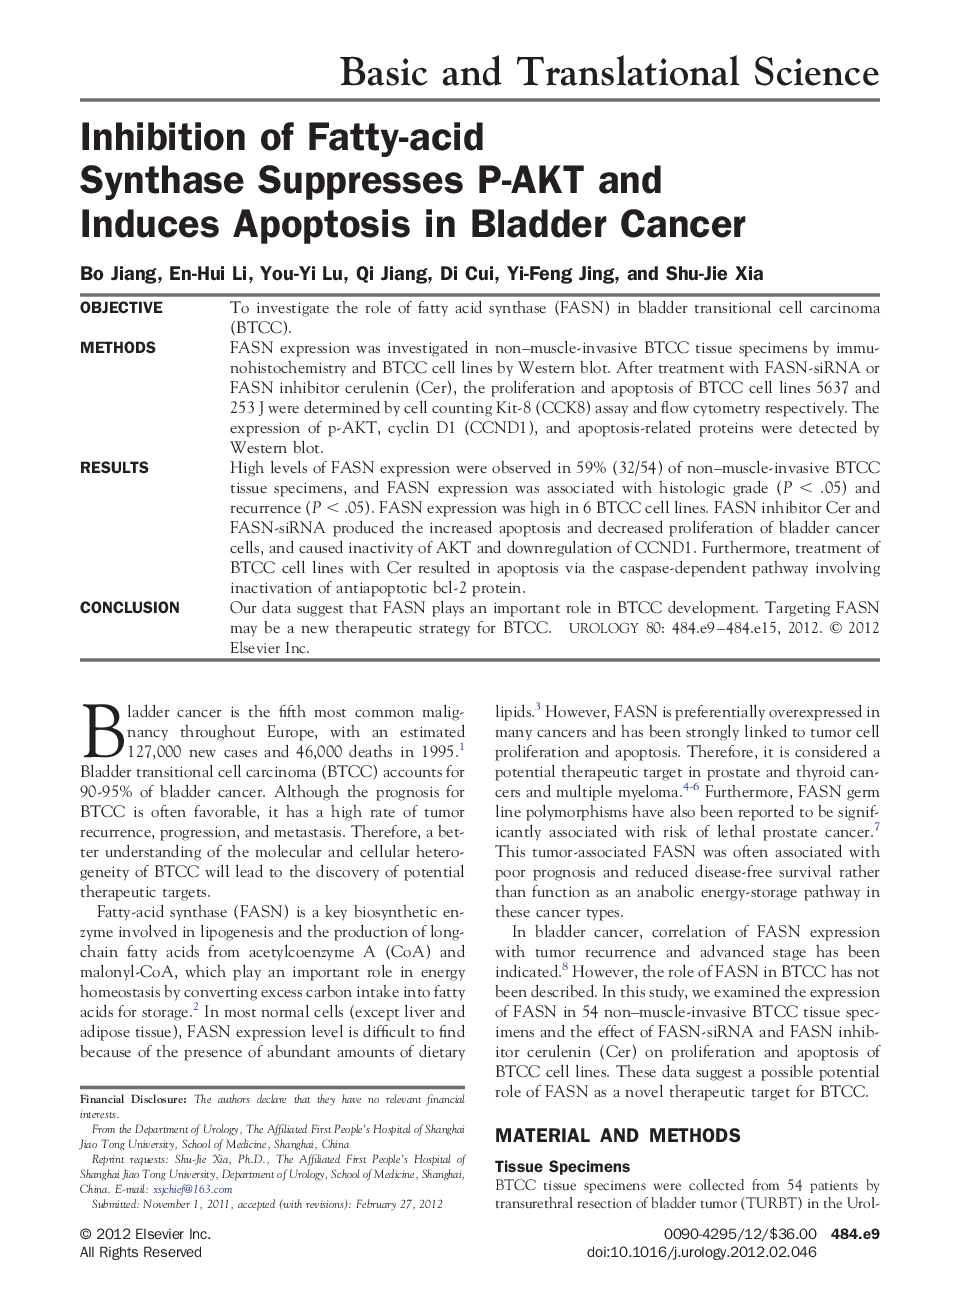 Inhibition of Fatty-acid Synthase Suppresses P-AKT and Induces Apoptosis in Bladder Cancer